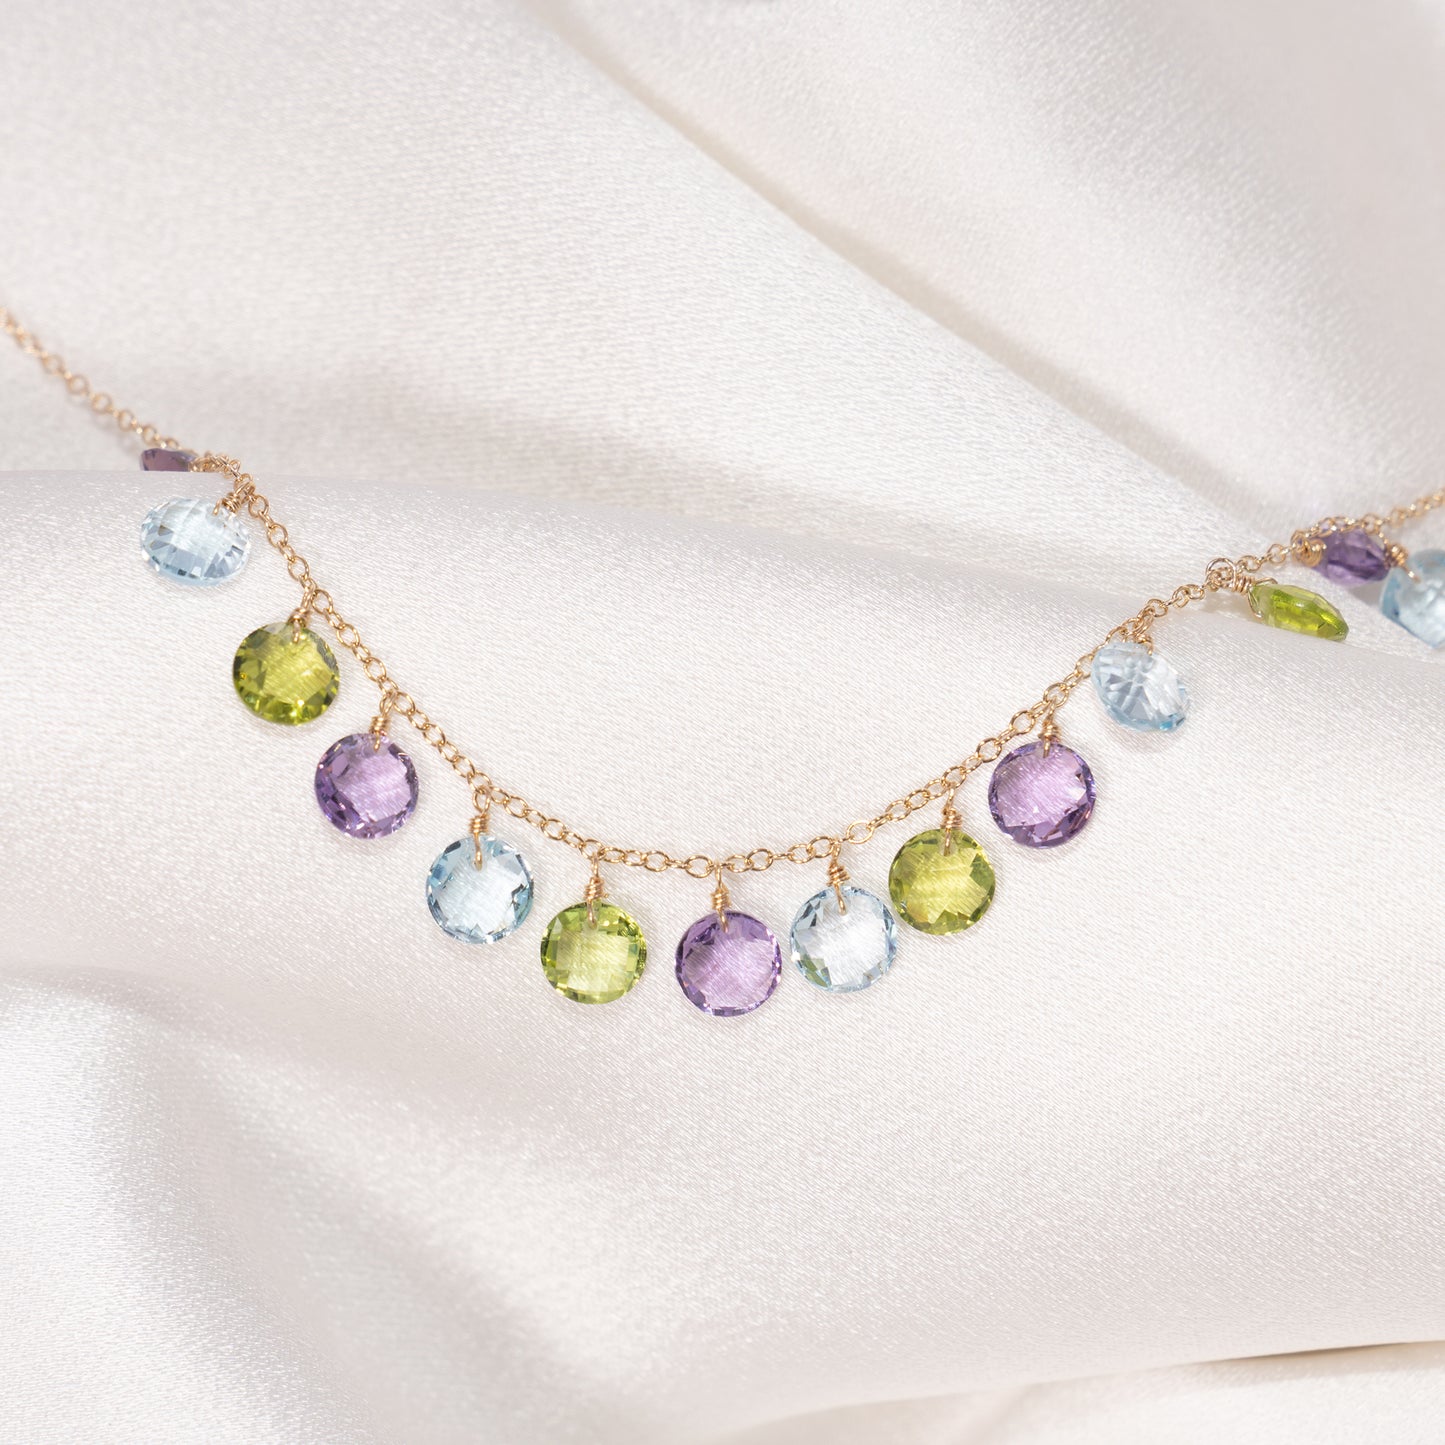 14k Peridot, Amethyst, and Sky Blue Topaz Coin Drop Necklace 17"